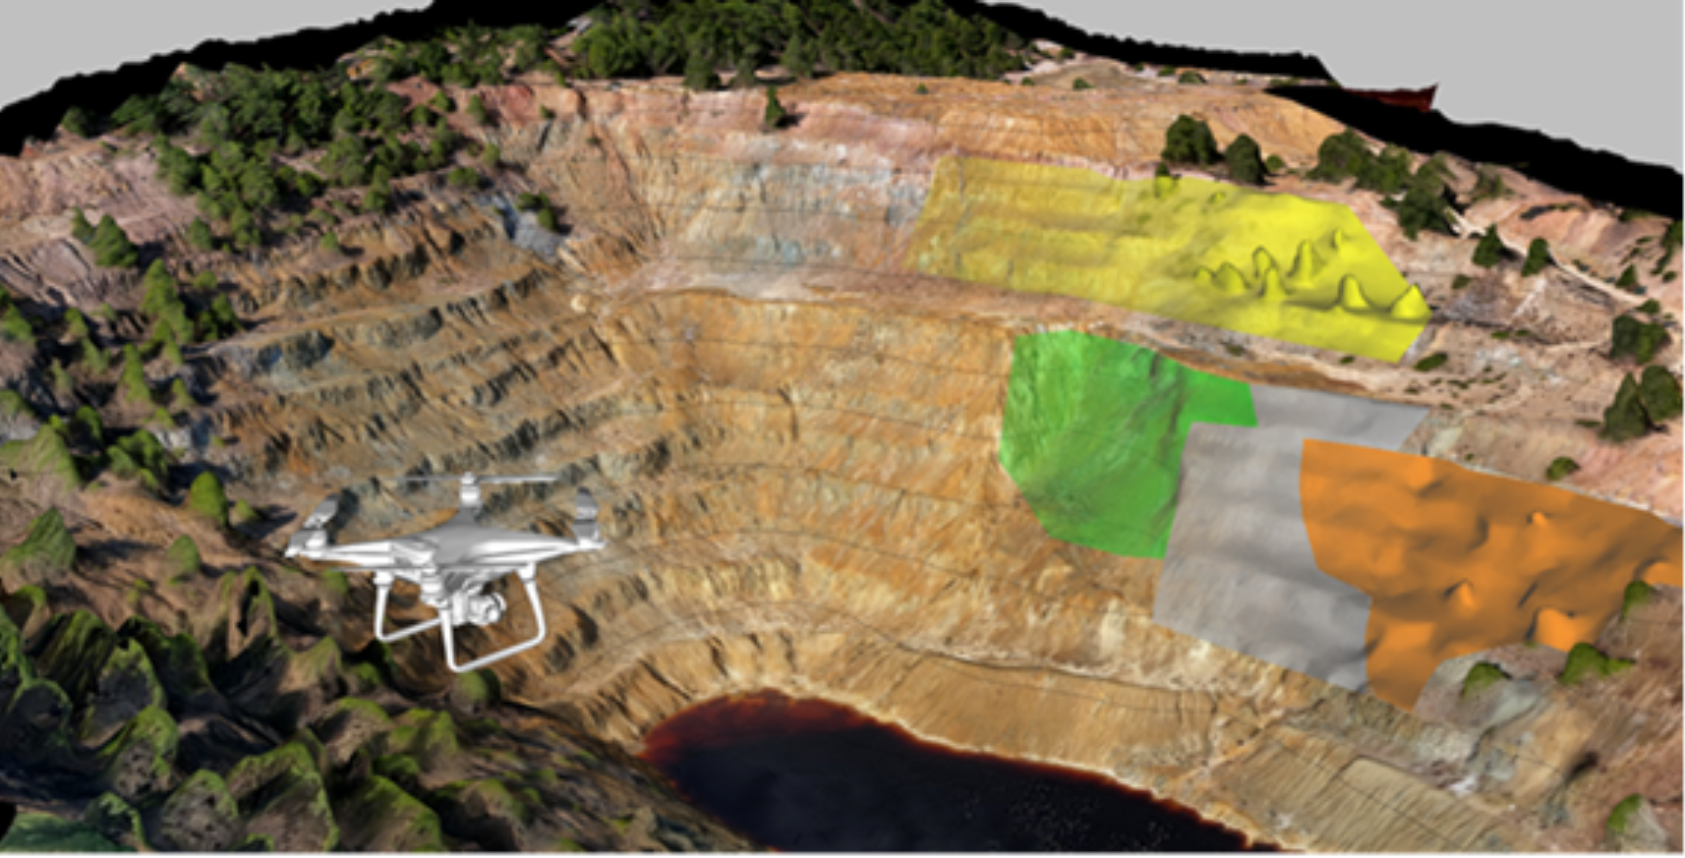 3D model courtesy ReMon project, GFZ Potsdam, The m4mining project will provide 3D models with mining and environmental mapping results, using drones and satellite data, such as in this former mine site., Courtesy Re Mon, , 